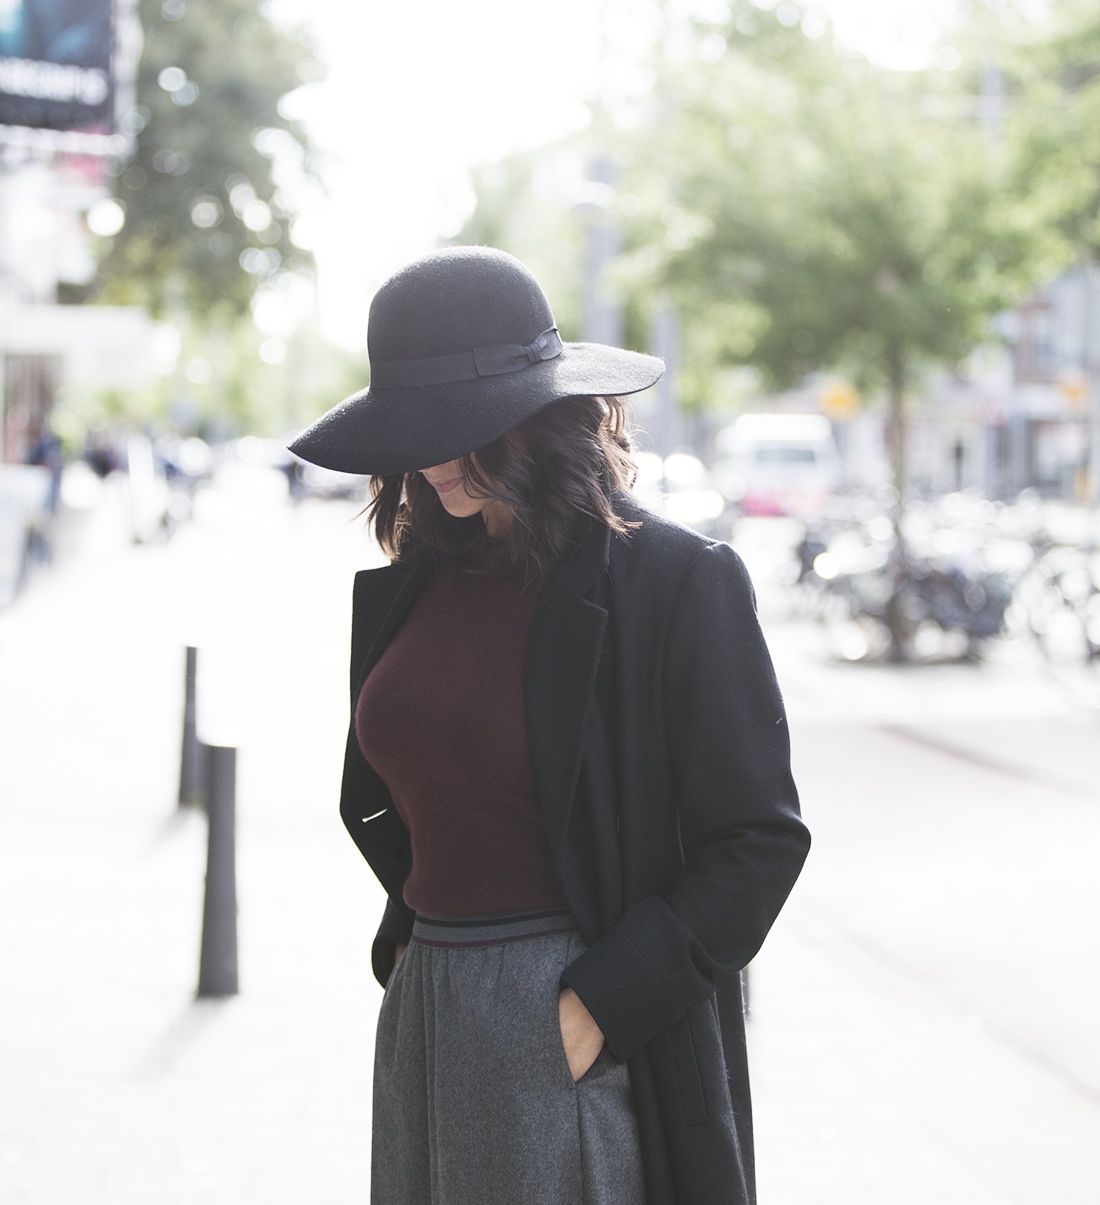 Fedora hat streetstyle fall 2016 Blogforshops look for Gerz Rotterdam